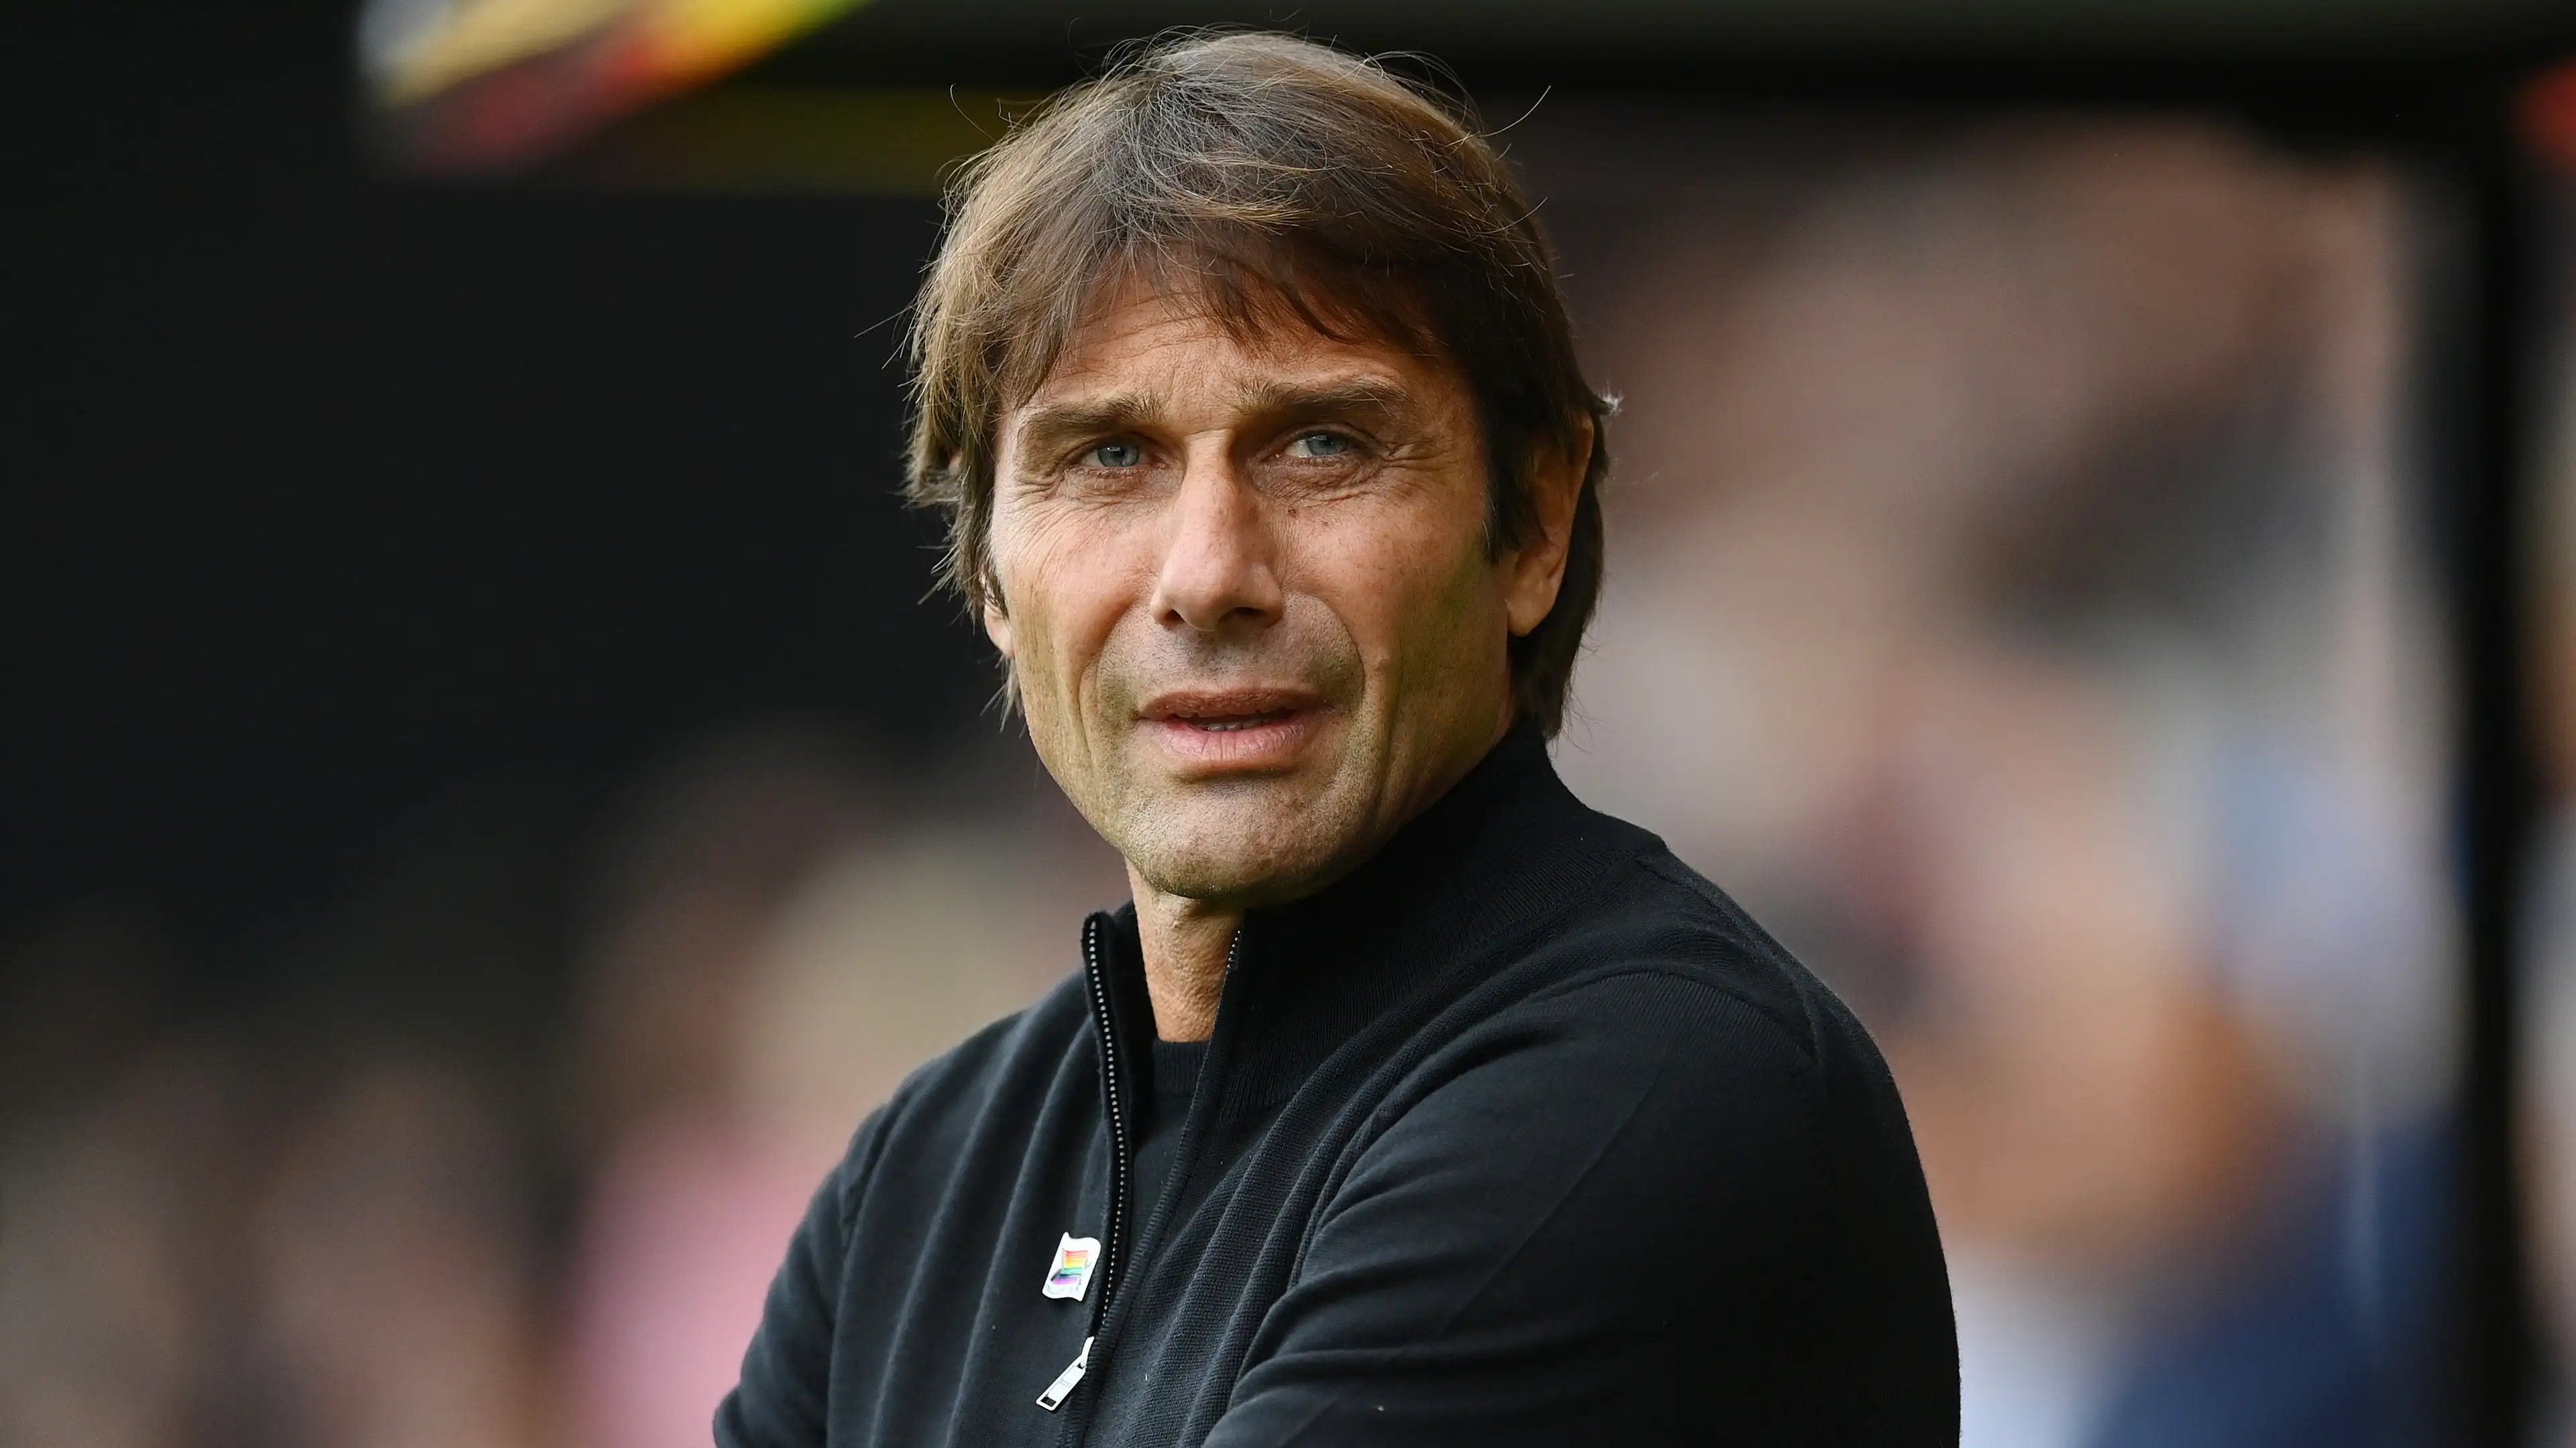 Conte Expects To Sign Three-Year Contract With Napoli With €8 Million Per Year Salary